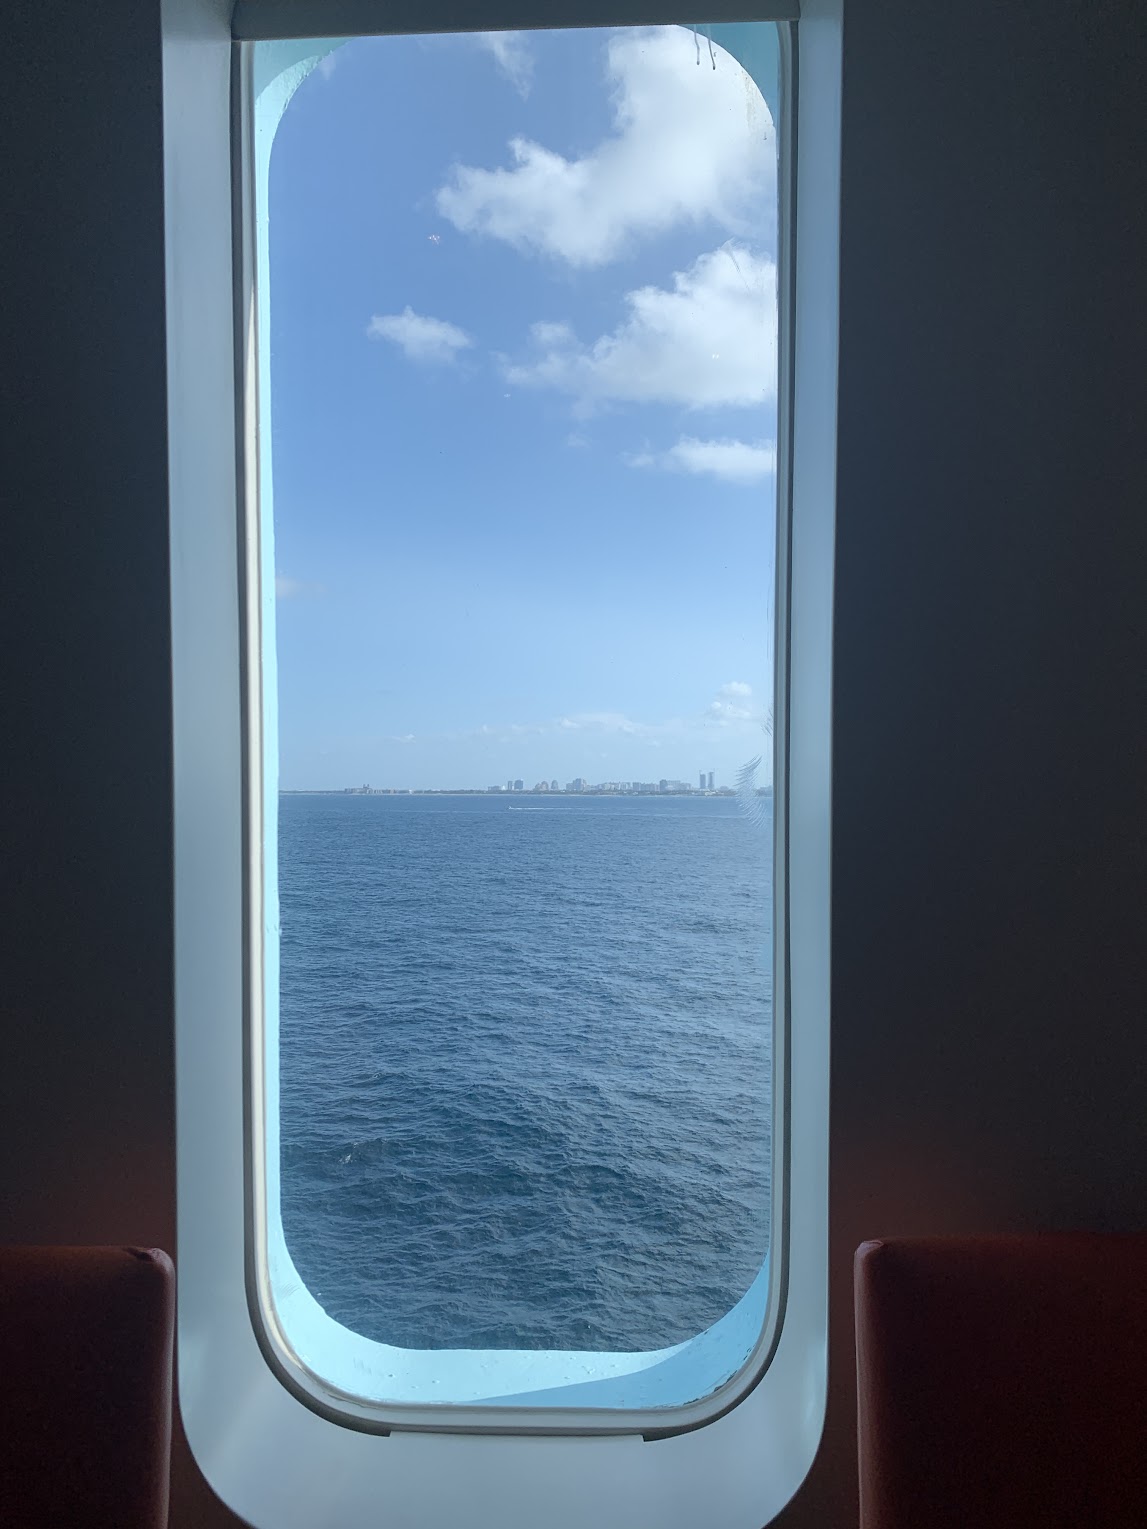 A window on a cruise ship showing the ocean.